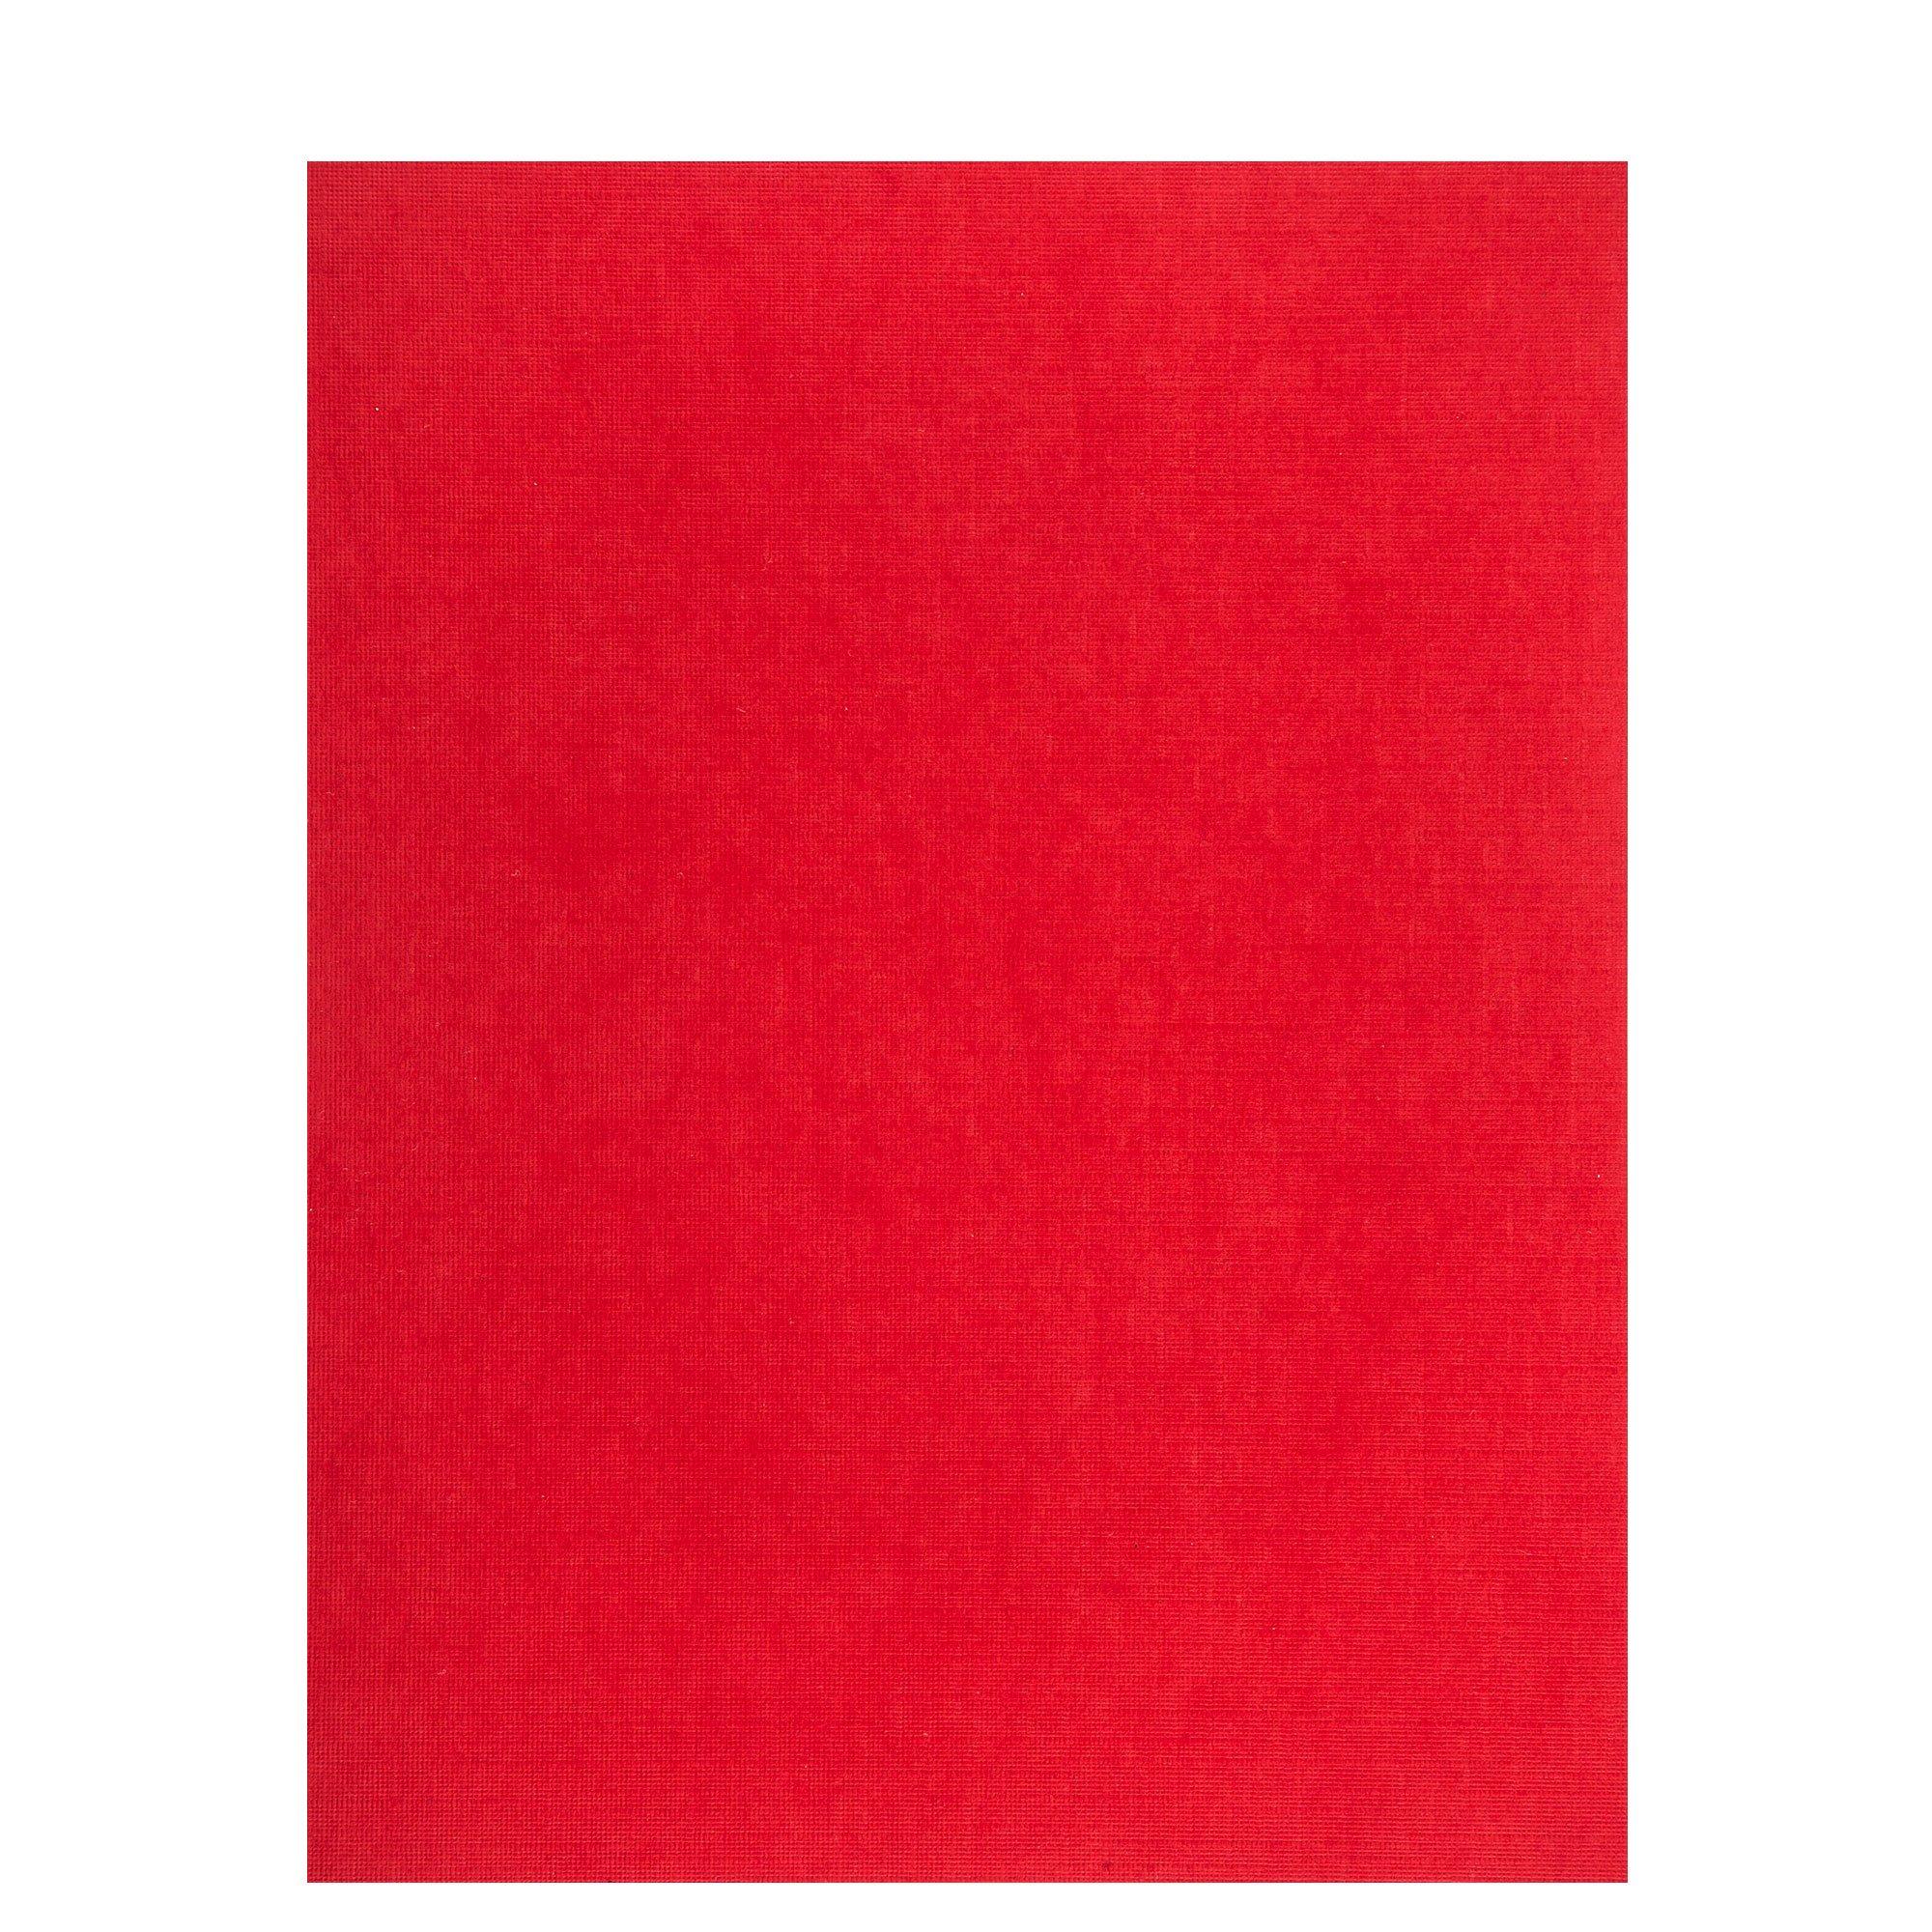 LUX 100 lb. Cardstock Paper 11 x 17 Ruby Red 1000 Sheets/Pack  (1117-C-18-1M)